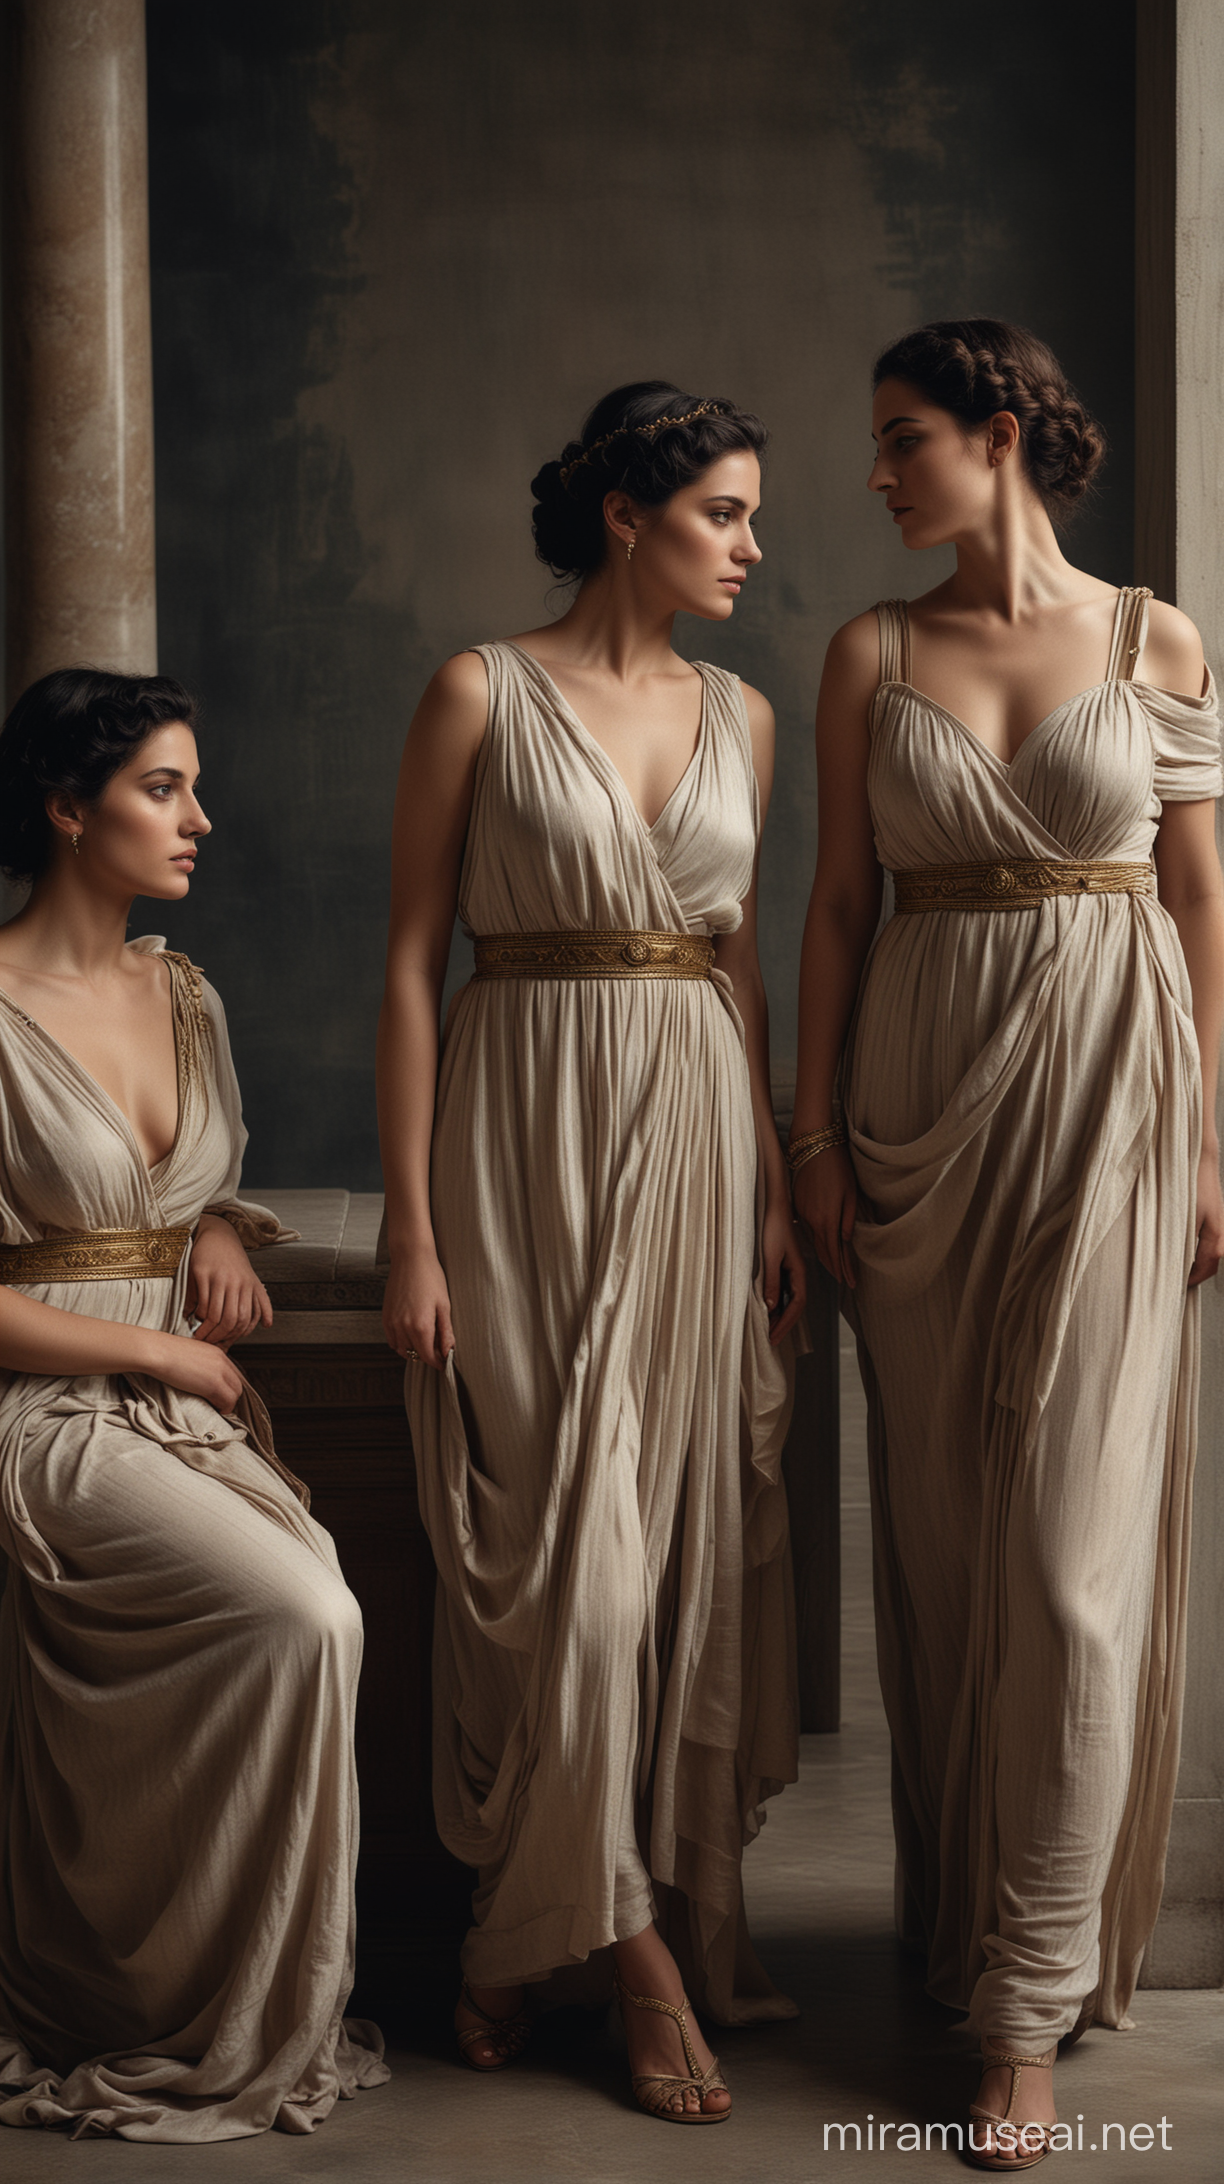 Elegant Women in Ancient Roman Attire Timeless Sophistication and Sensuality